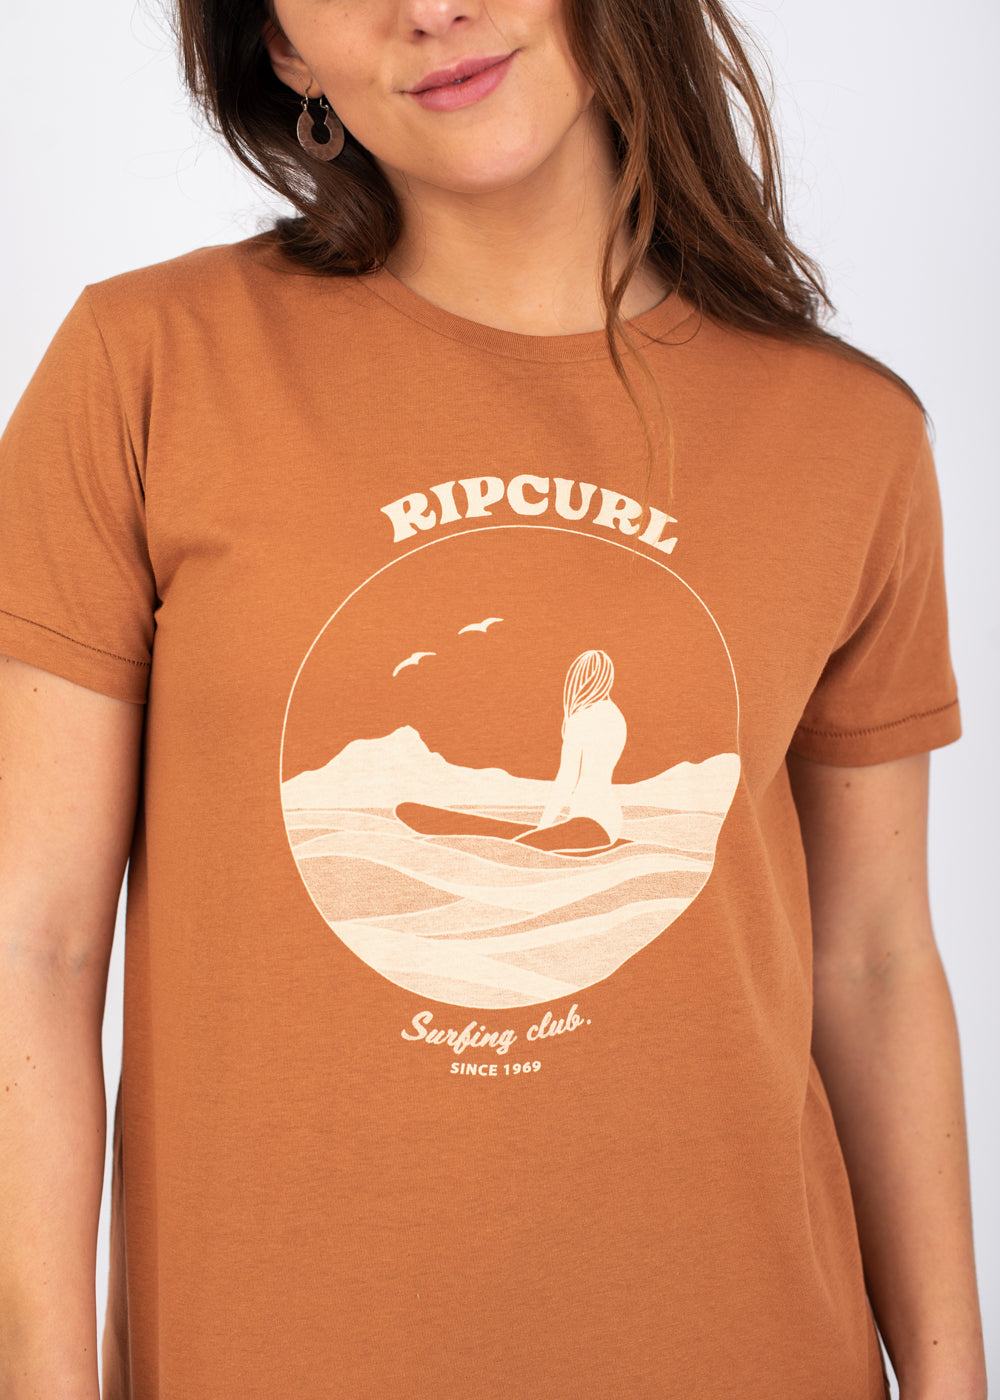 SAVE BIG on Re-Entry Brown Tee Rip Crew Shop for get at great and Light items service in Curl by a Neck the . outstanding price Rip Curl best